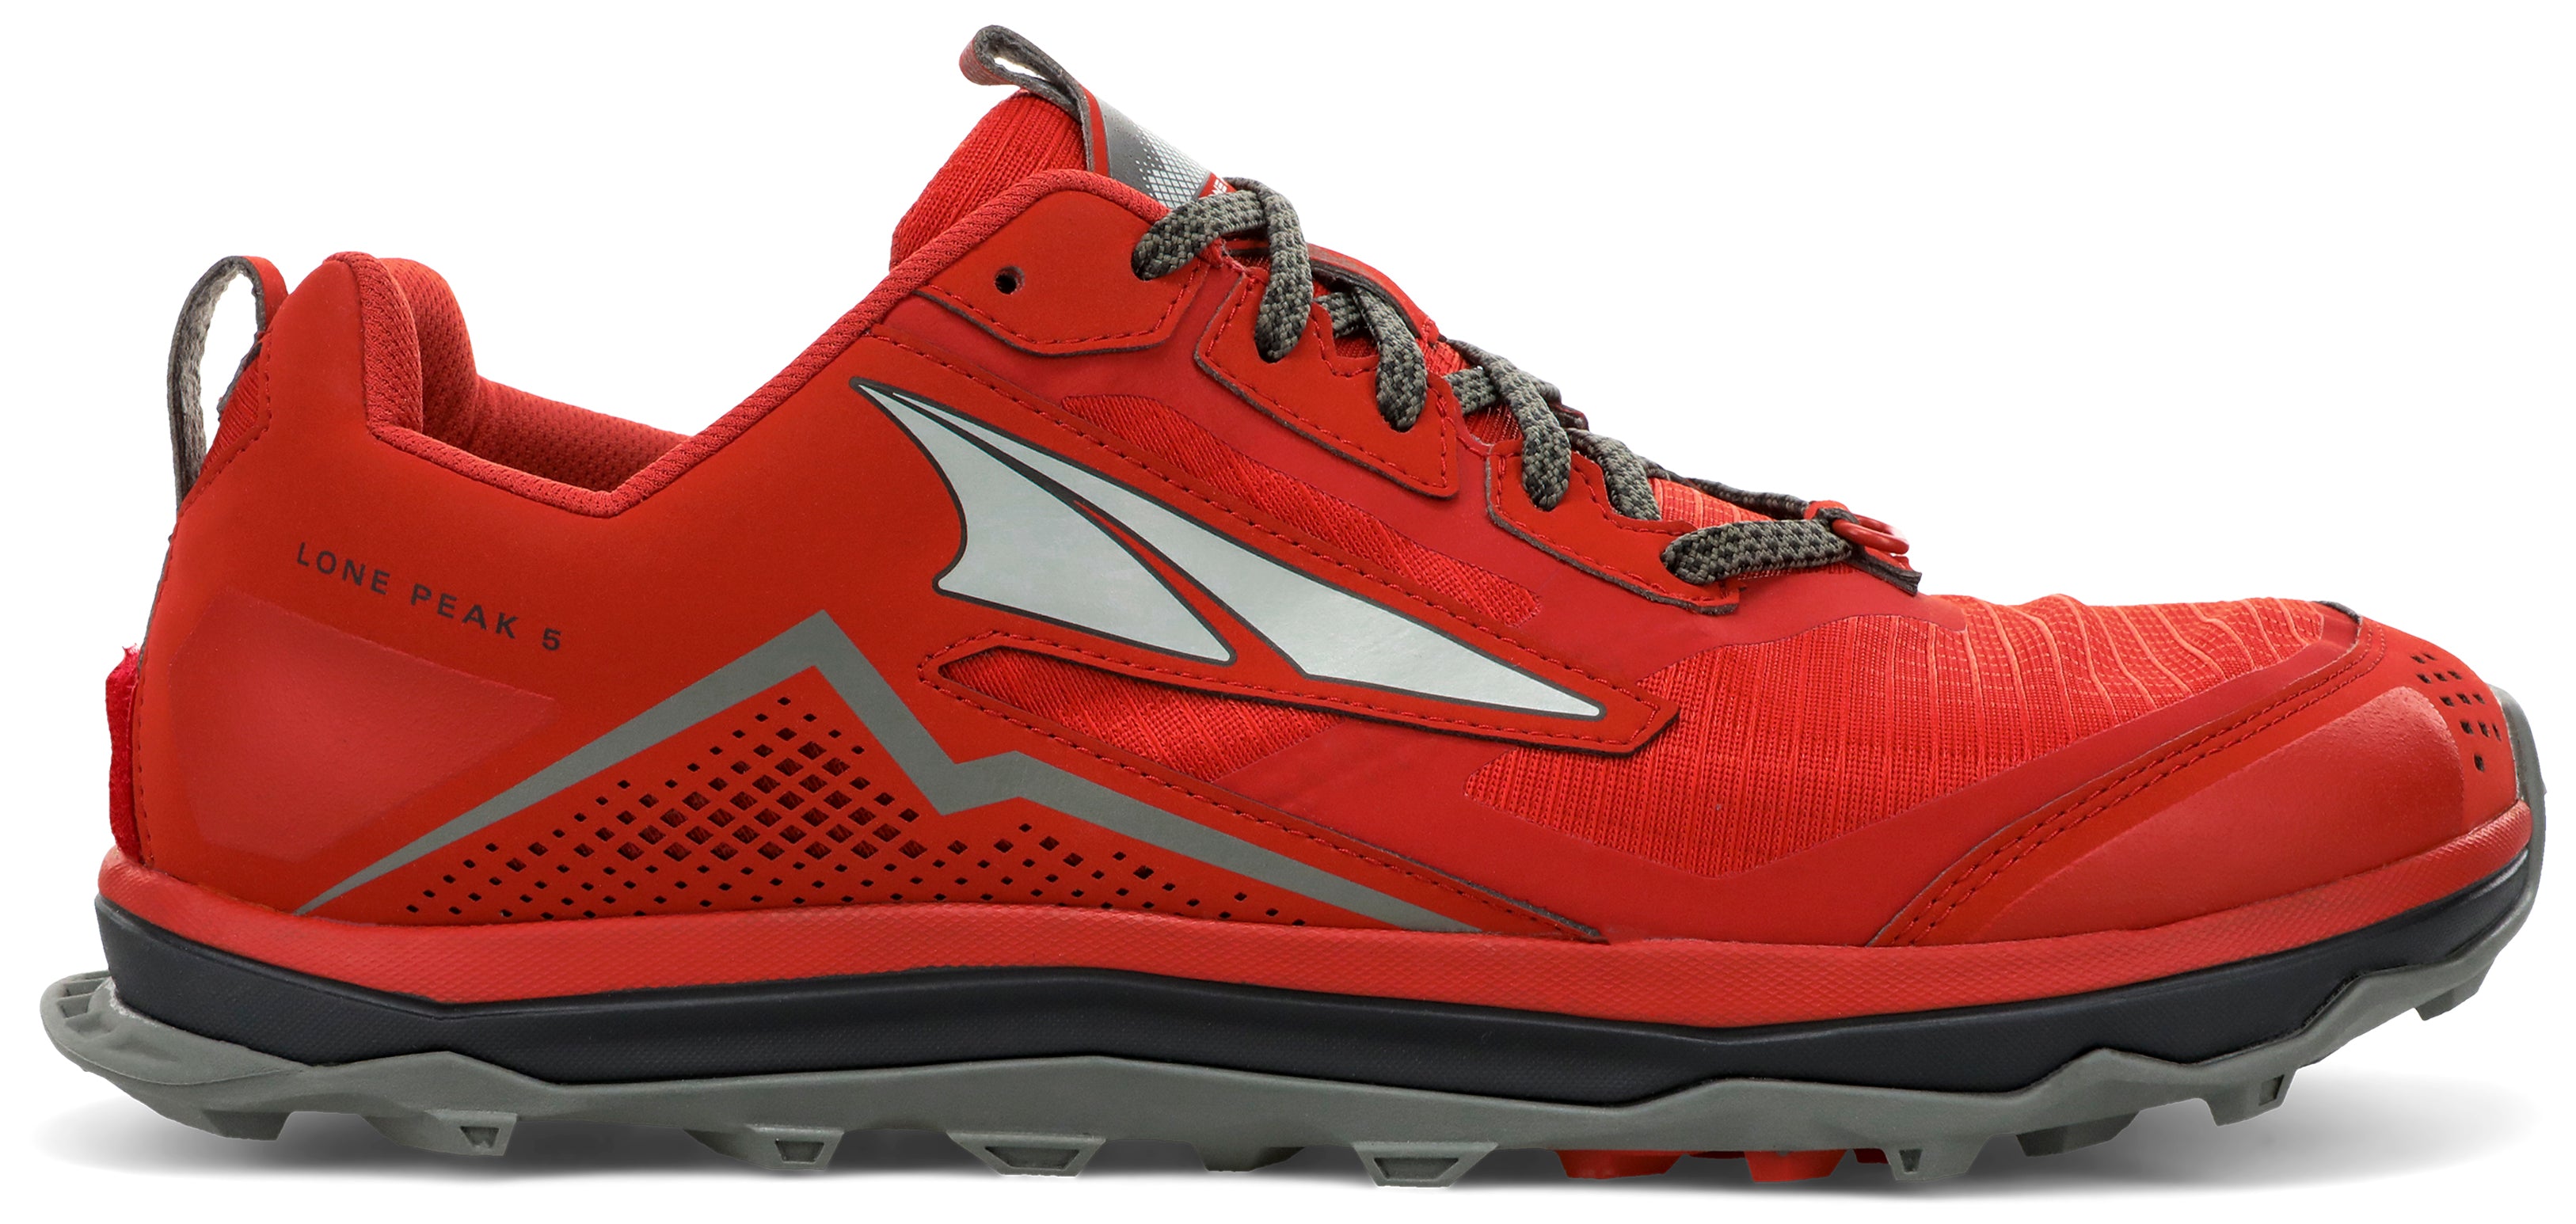 Altra Men's Lone Peak 5 Trail Running Shoe in Red from the side